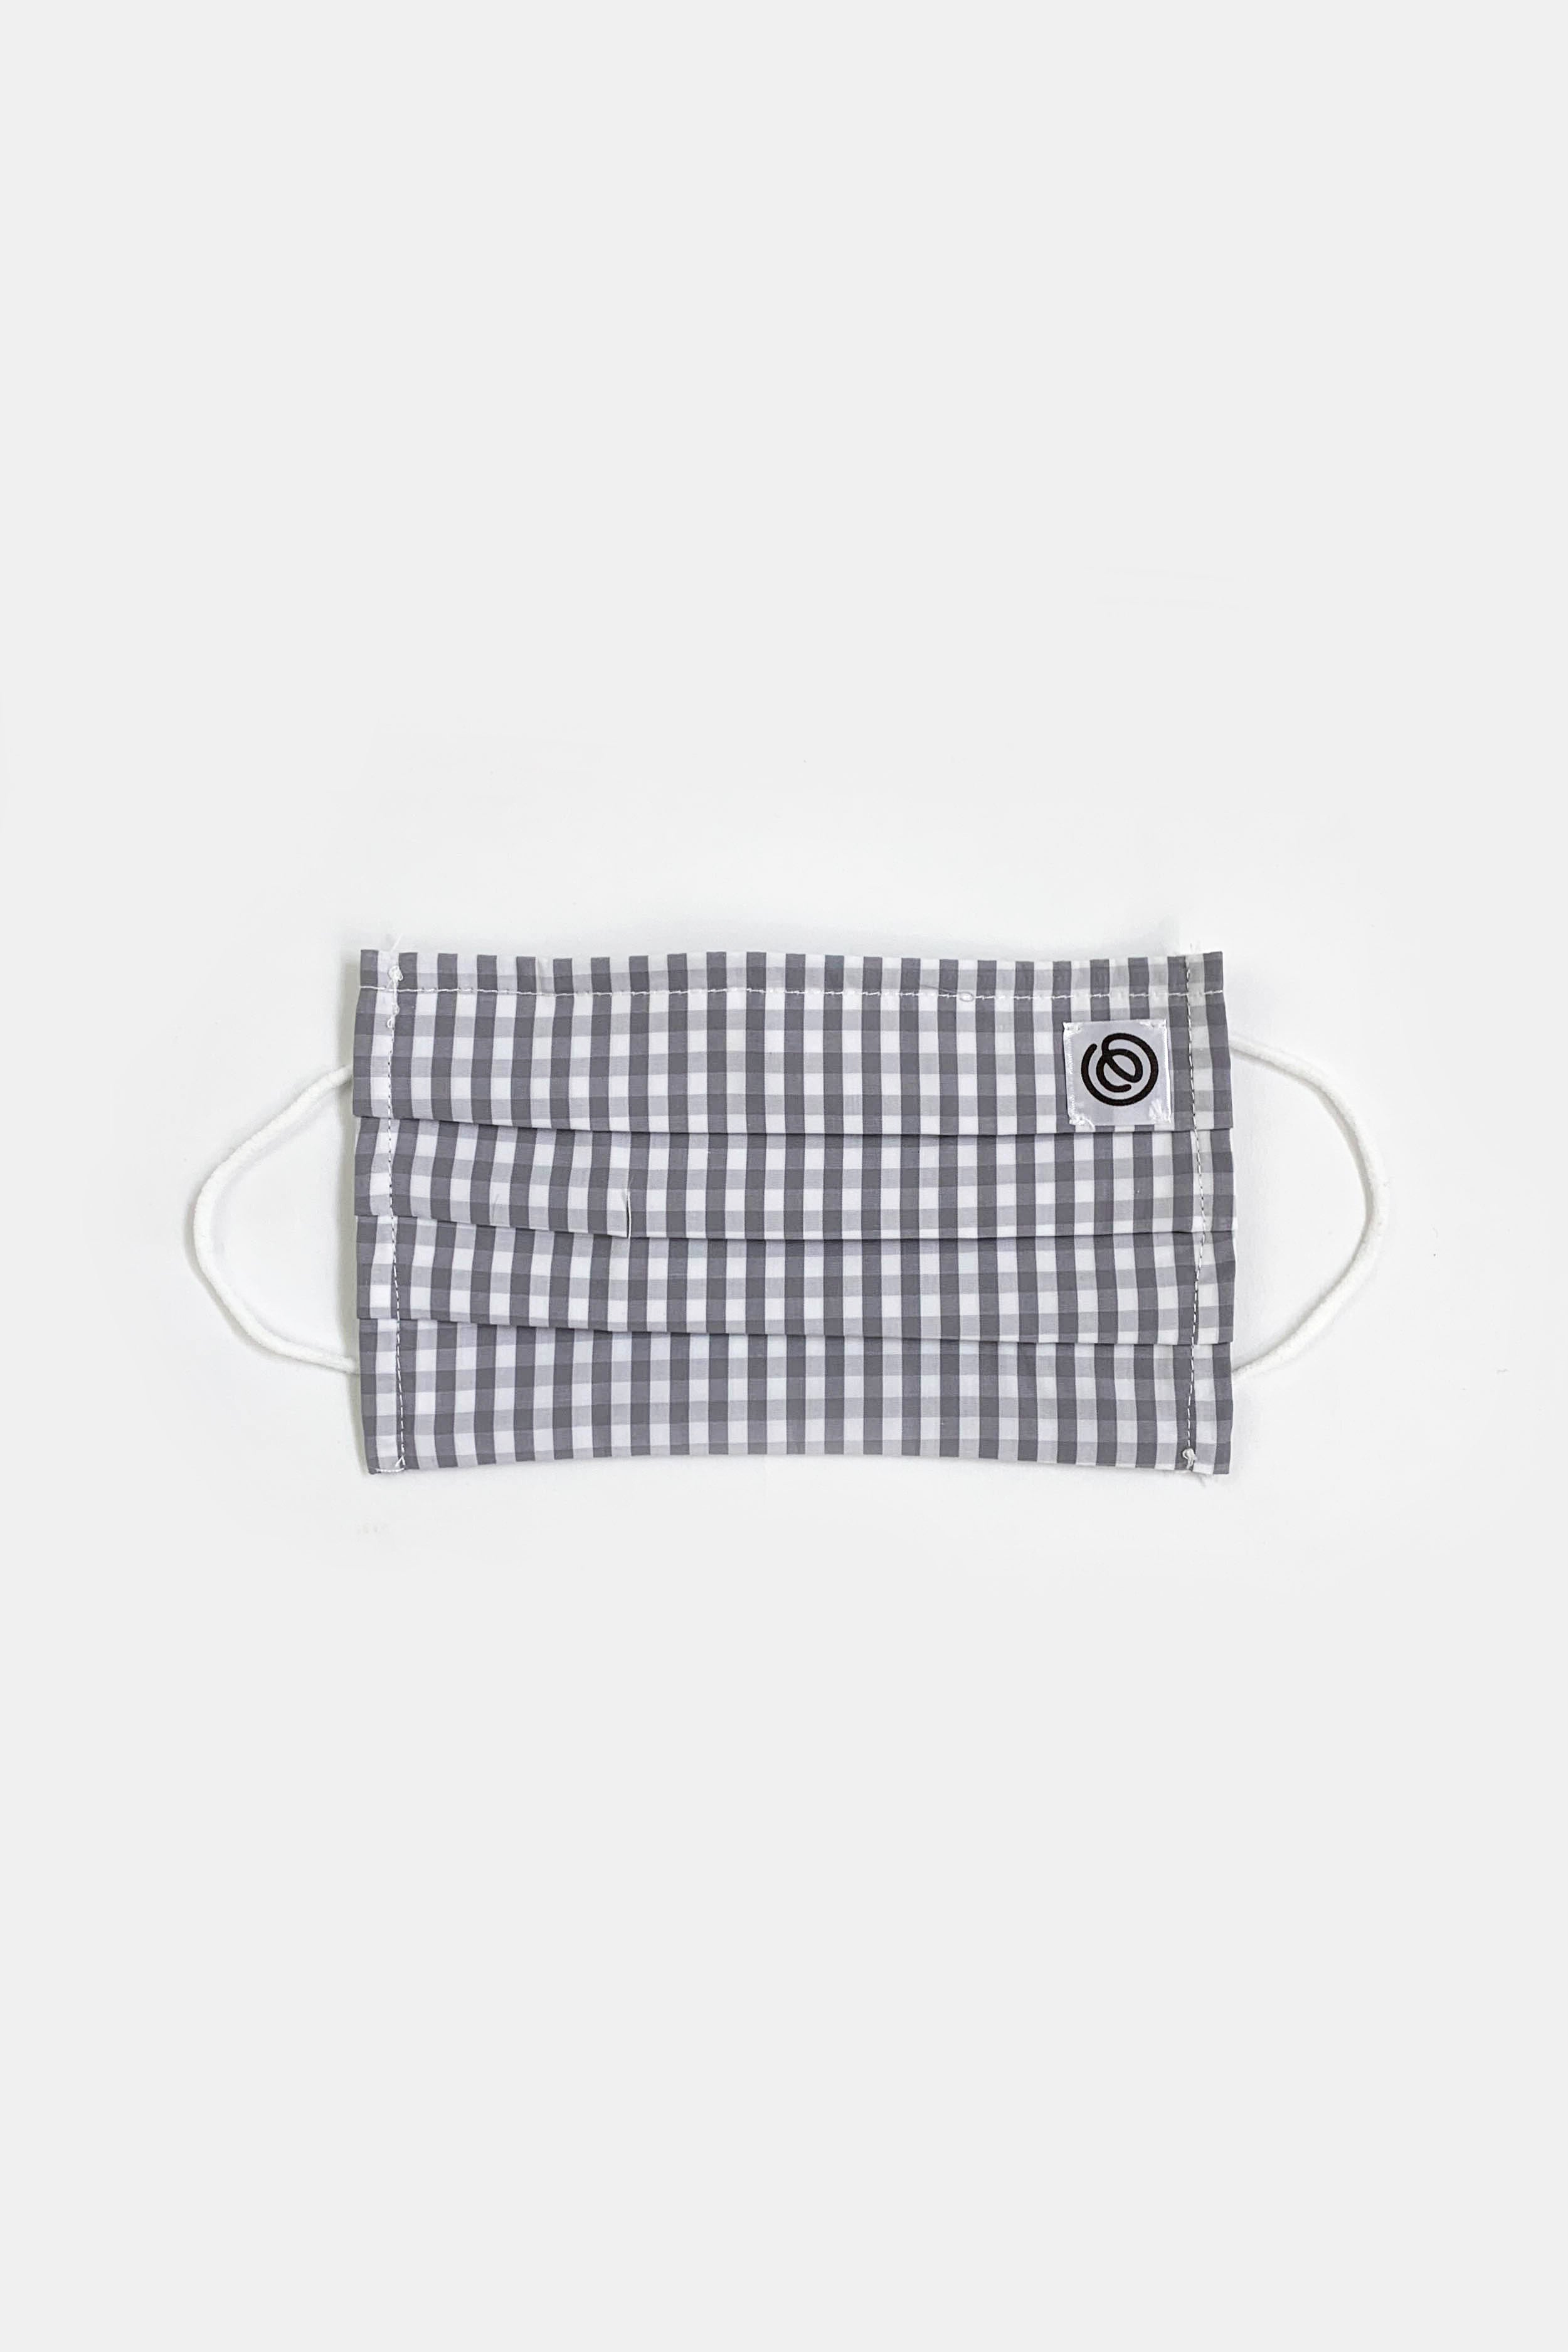 Easy Mondays Pleated Face Mask in Grey Medium Gingham